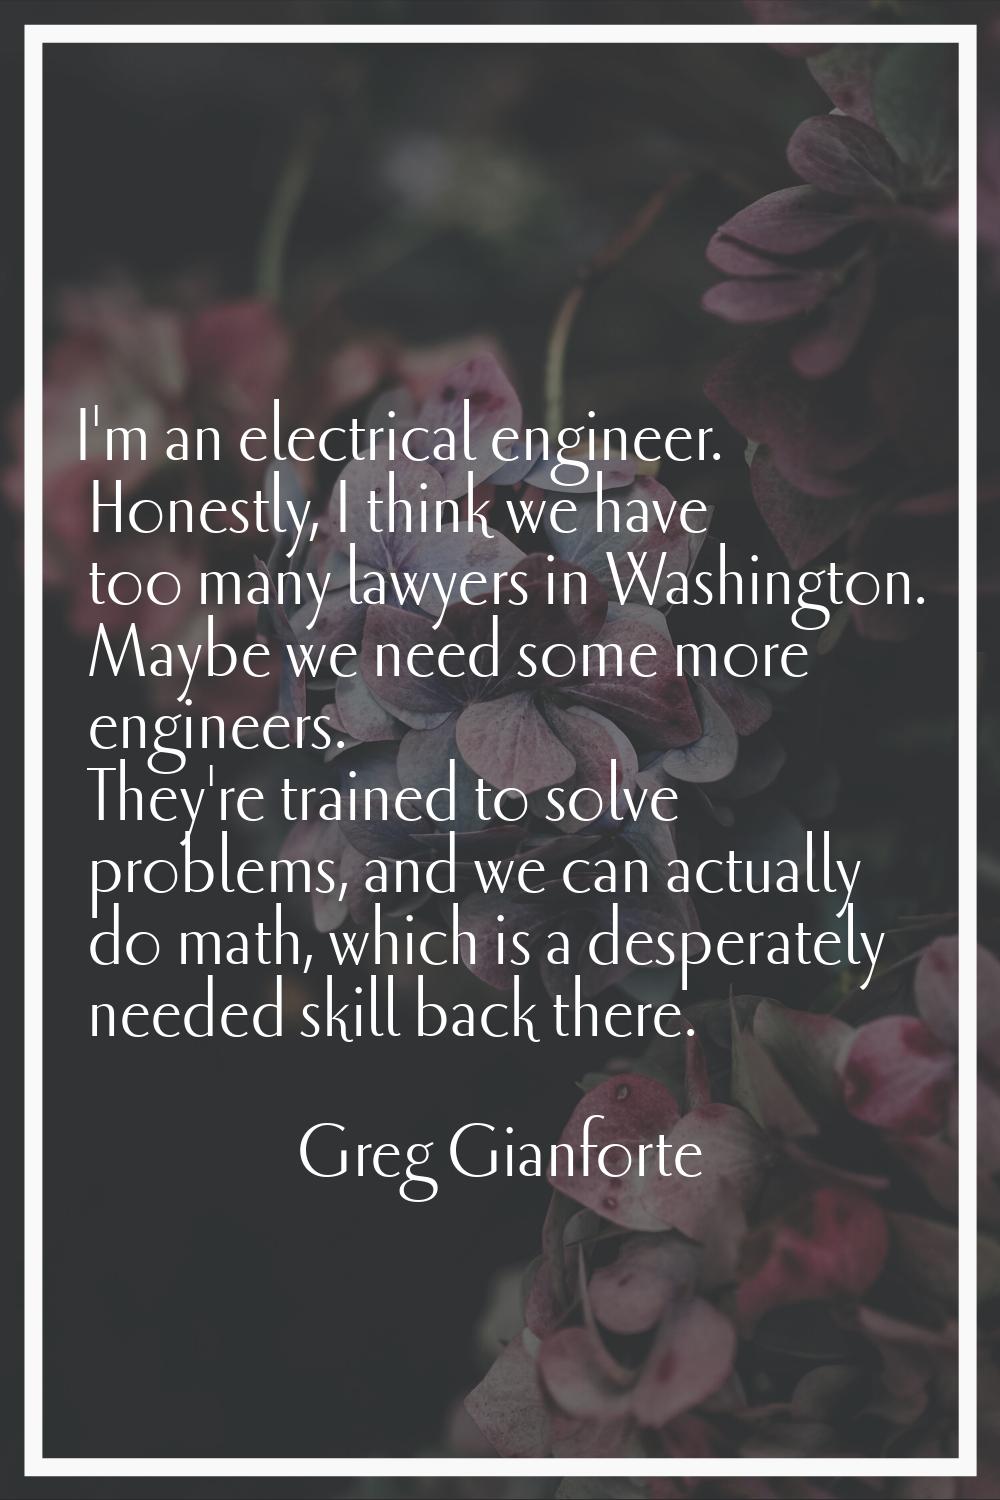 I'm an electrical engineer. Honestly, I think we have too many lawyers in Washington. Maybe we need